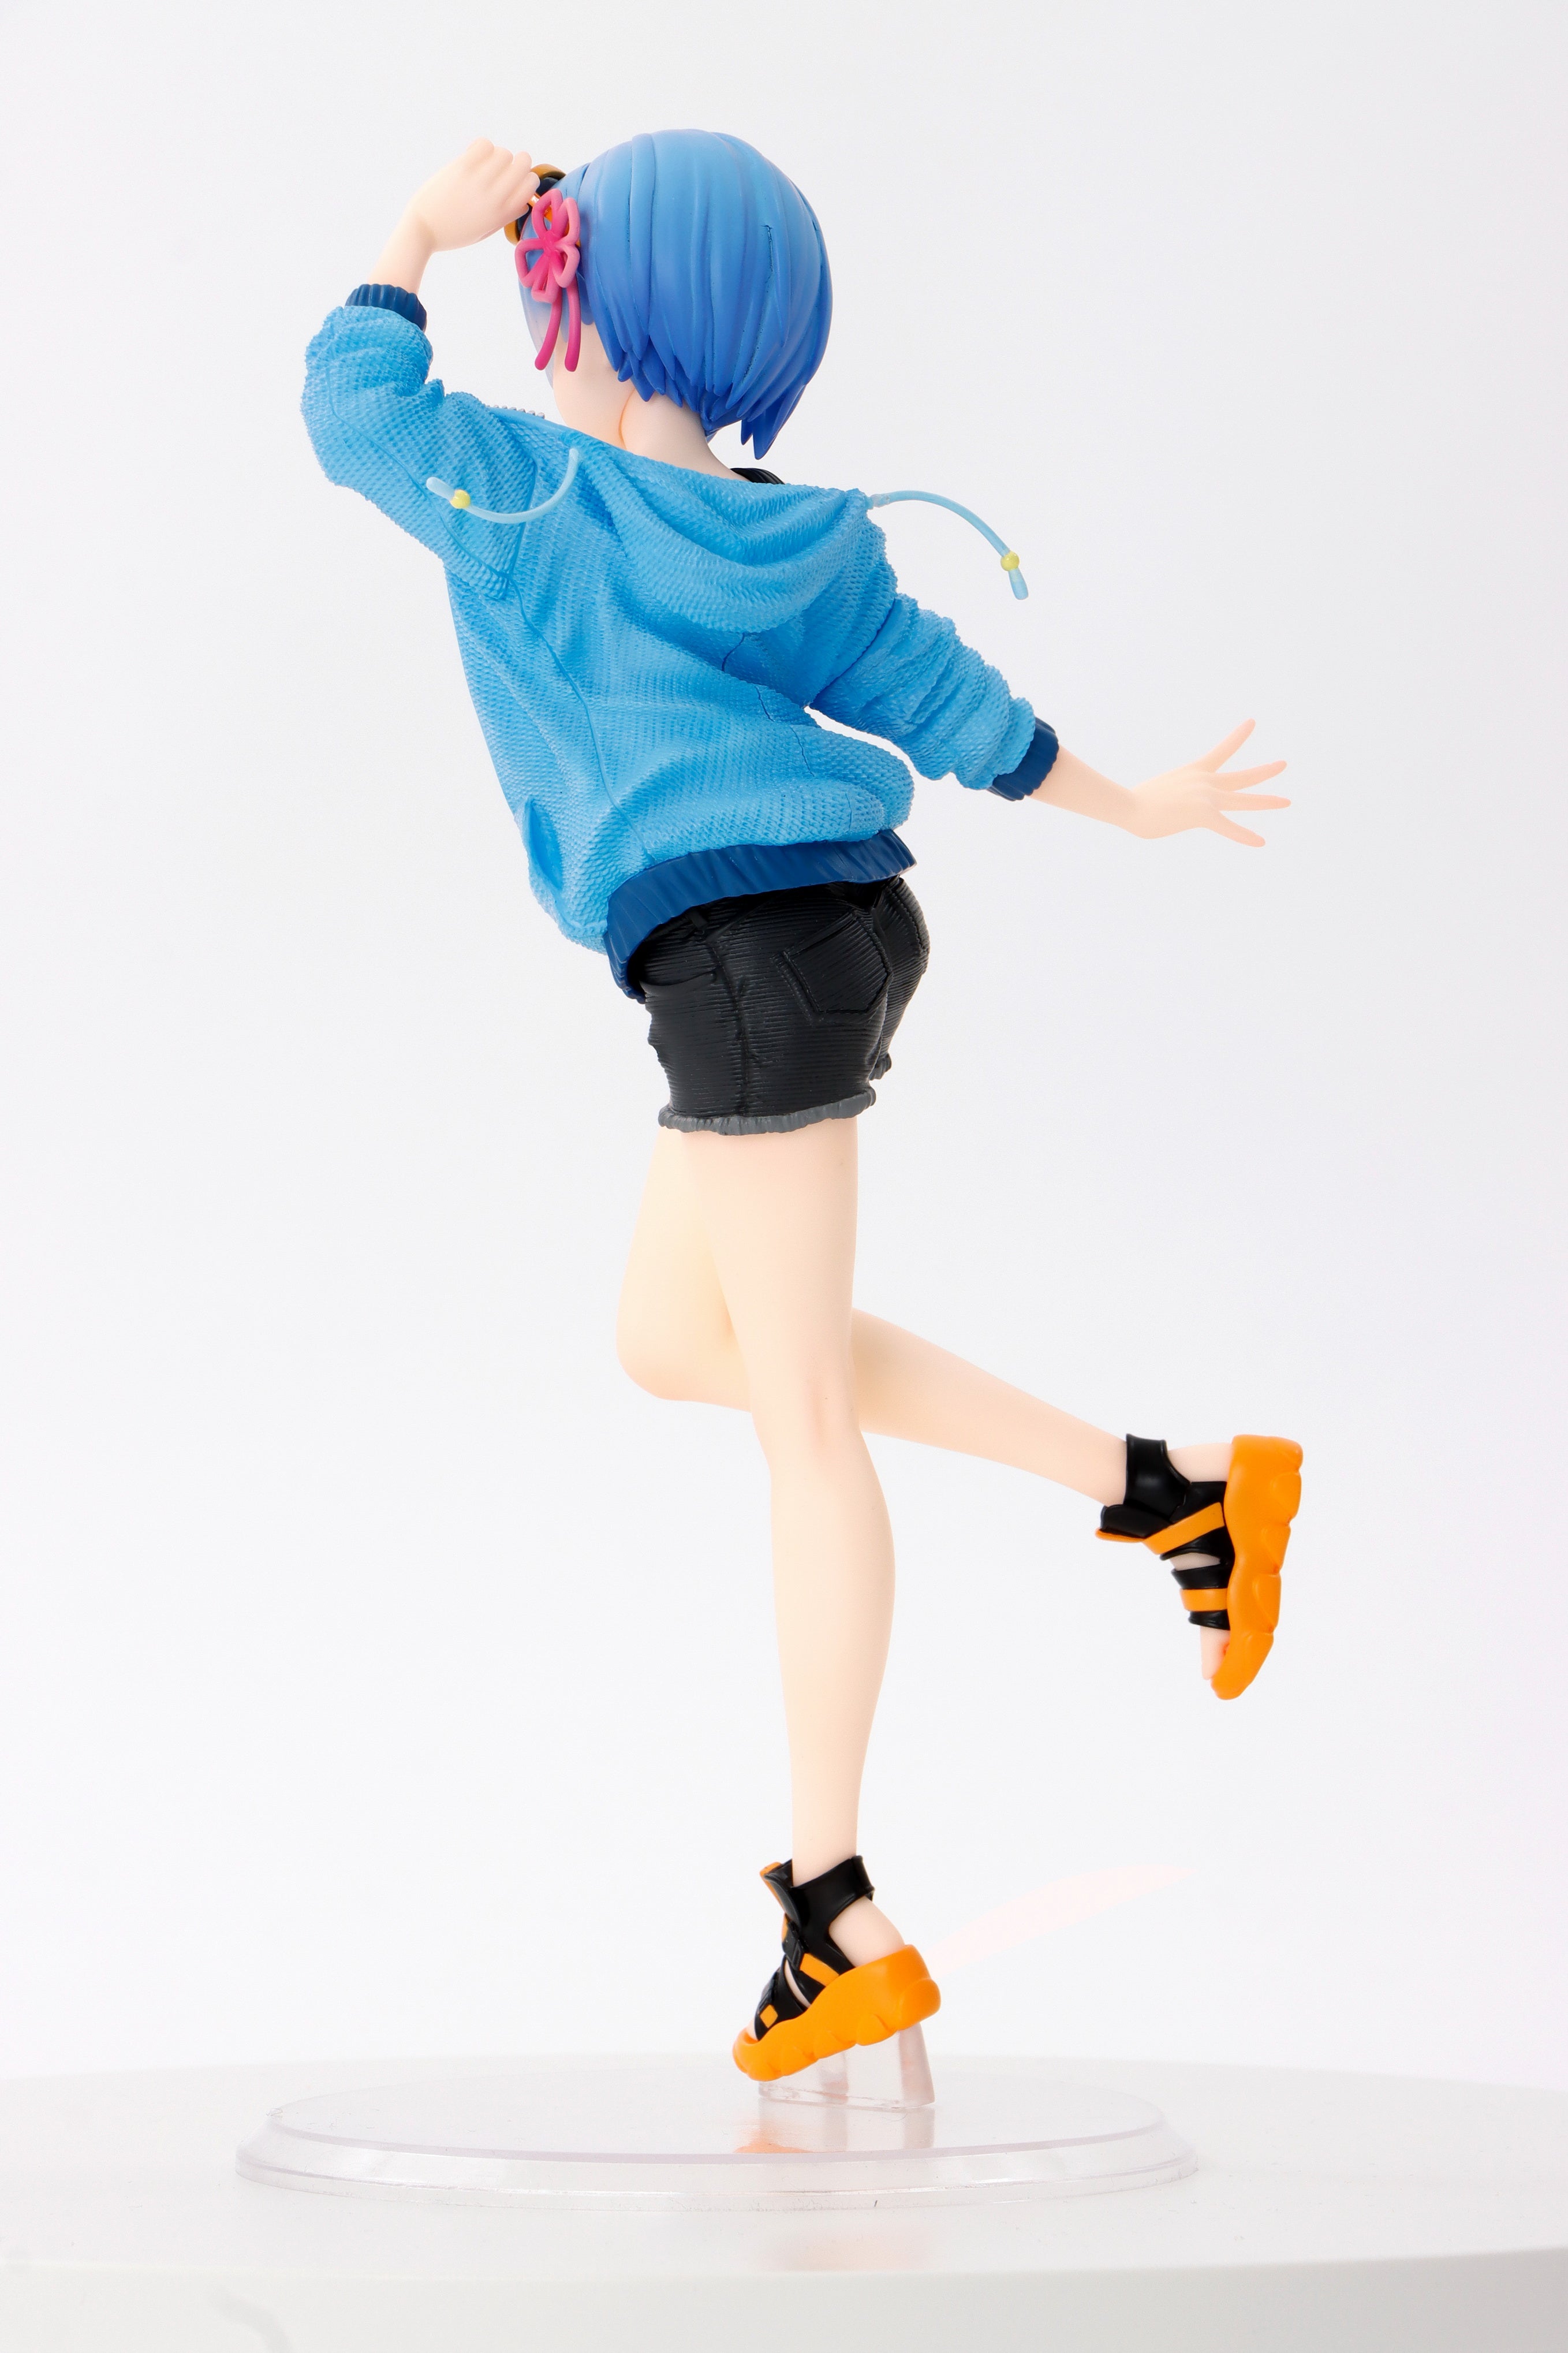 PRE-ORDER Re:ZERO -Starting Life in Another World Precious Figure - Rem: Sporty Summer